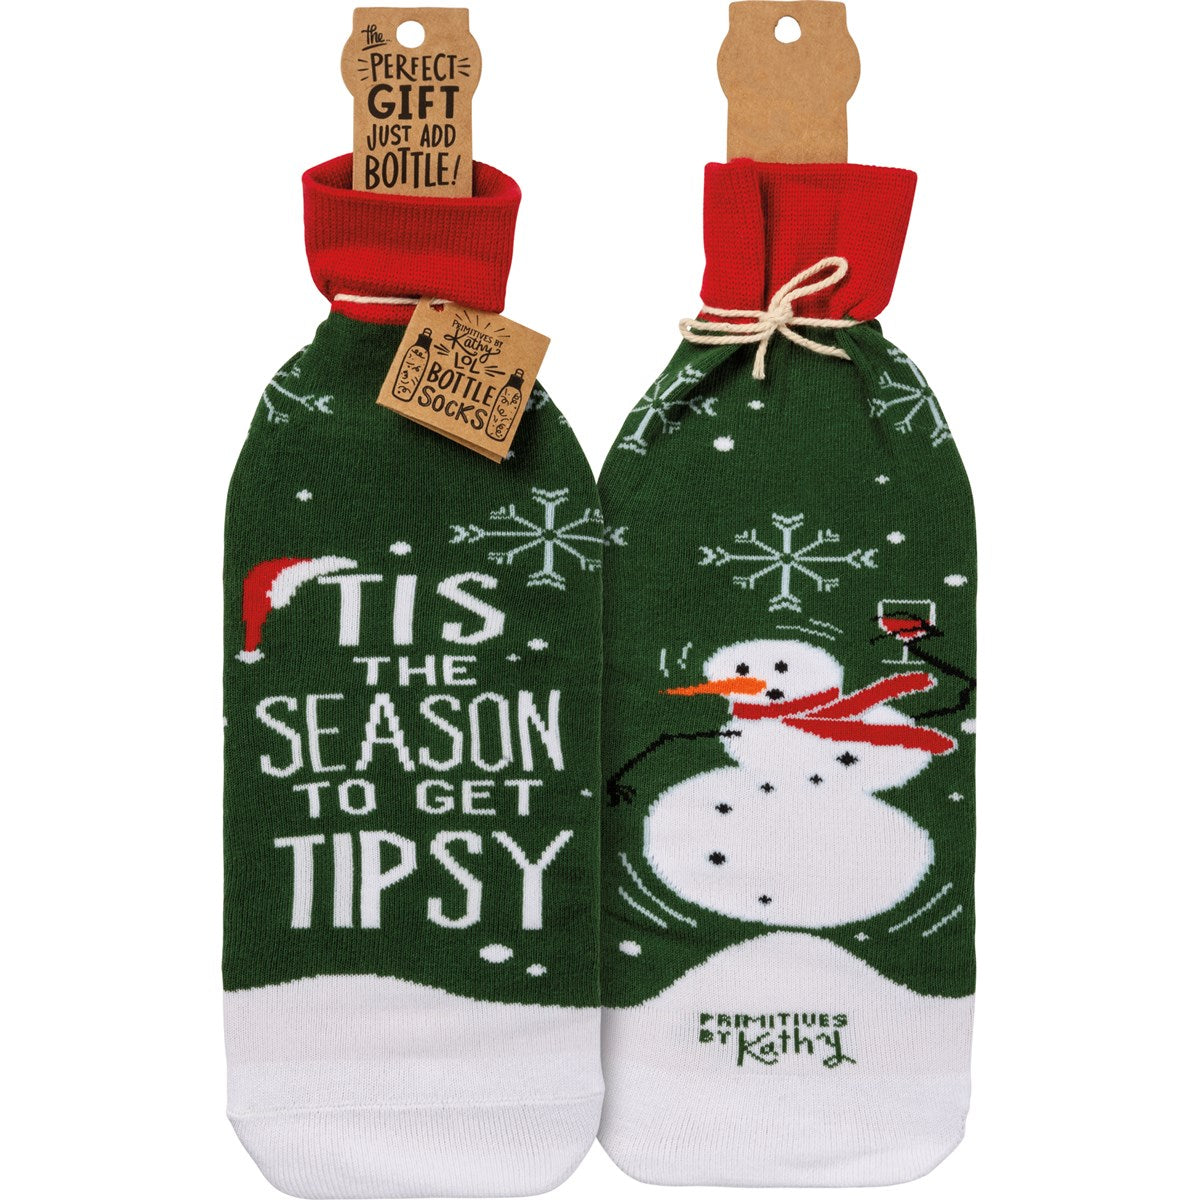 Bottle Cover Tis the Season To Get Tipsy